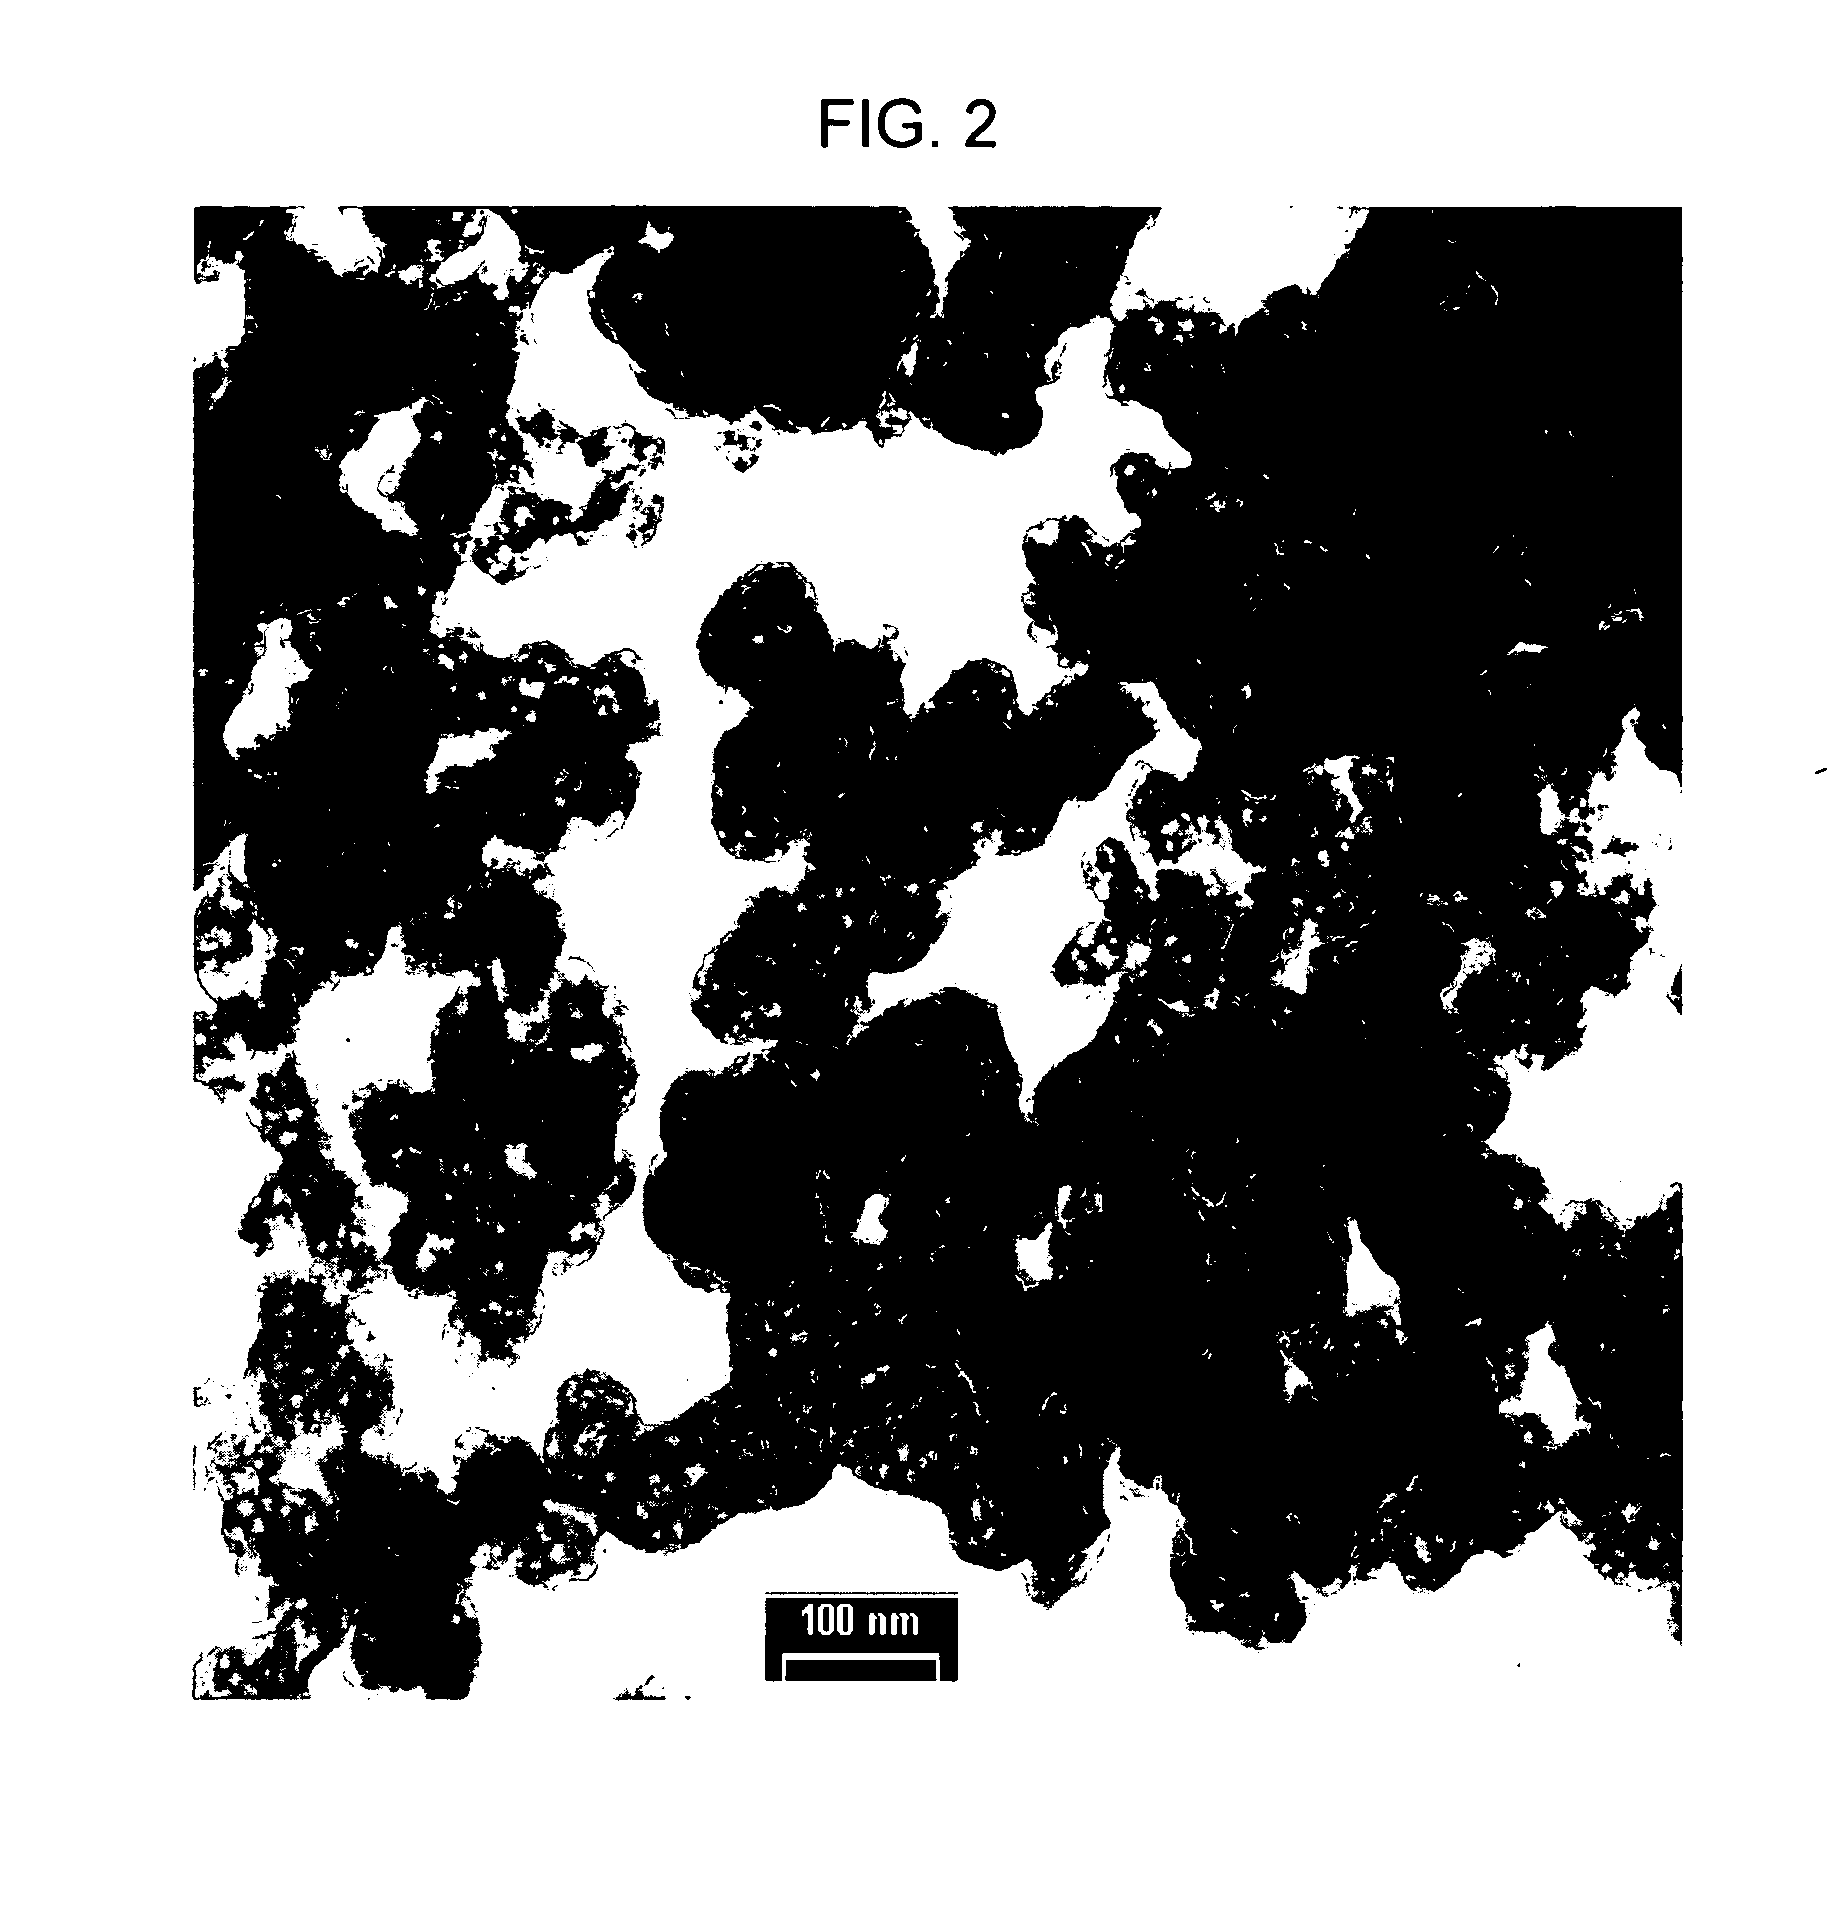 Aluminum phosphate or polyphosphate particles for use as pigments in paints and method of making same